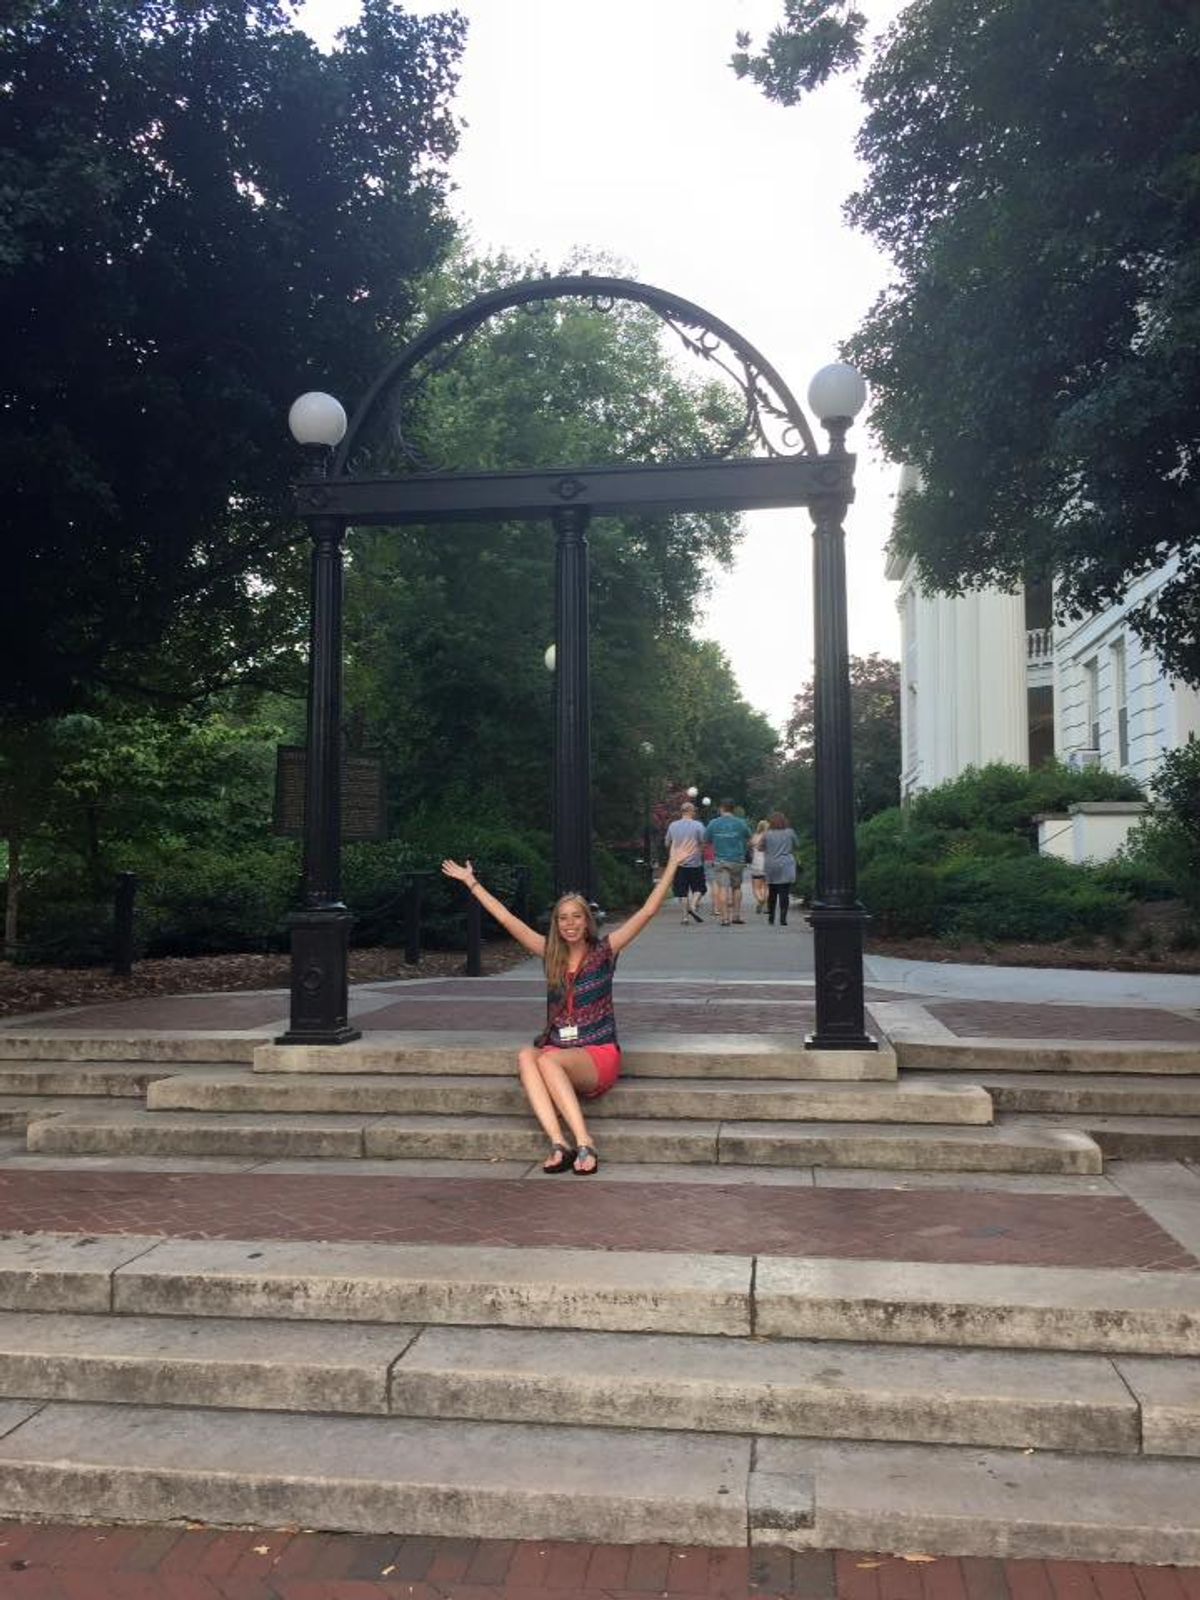 Top 7 Things I Learned While At UGA